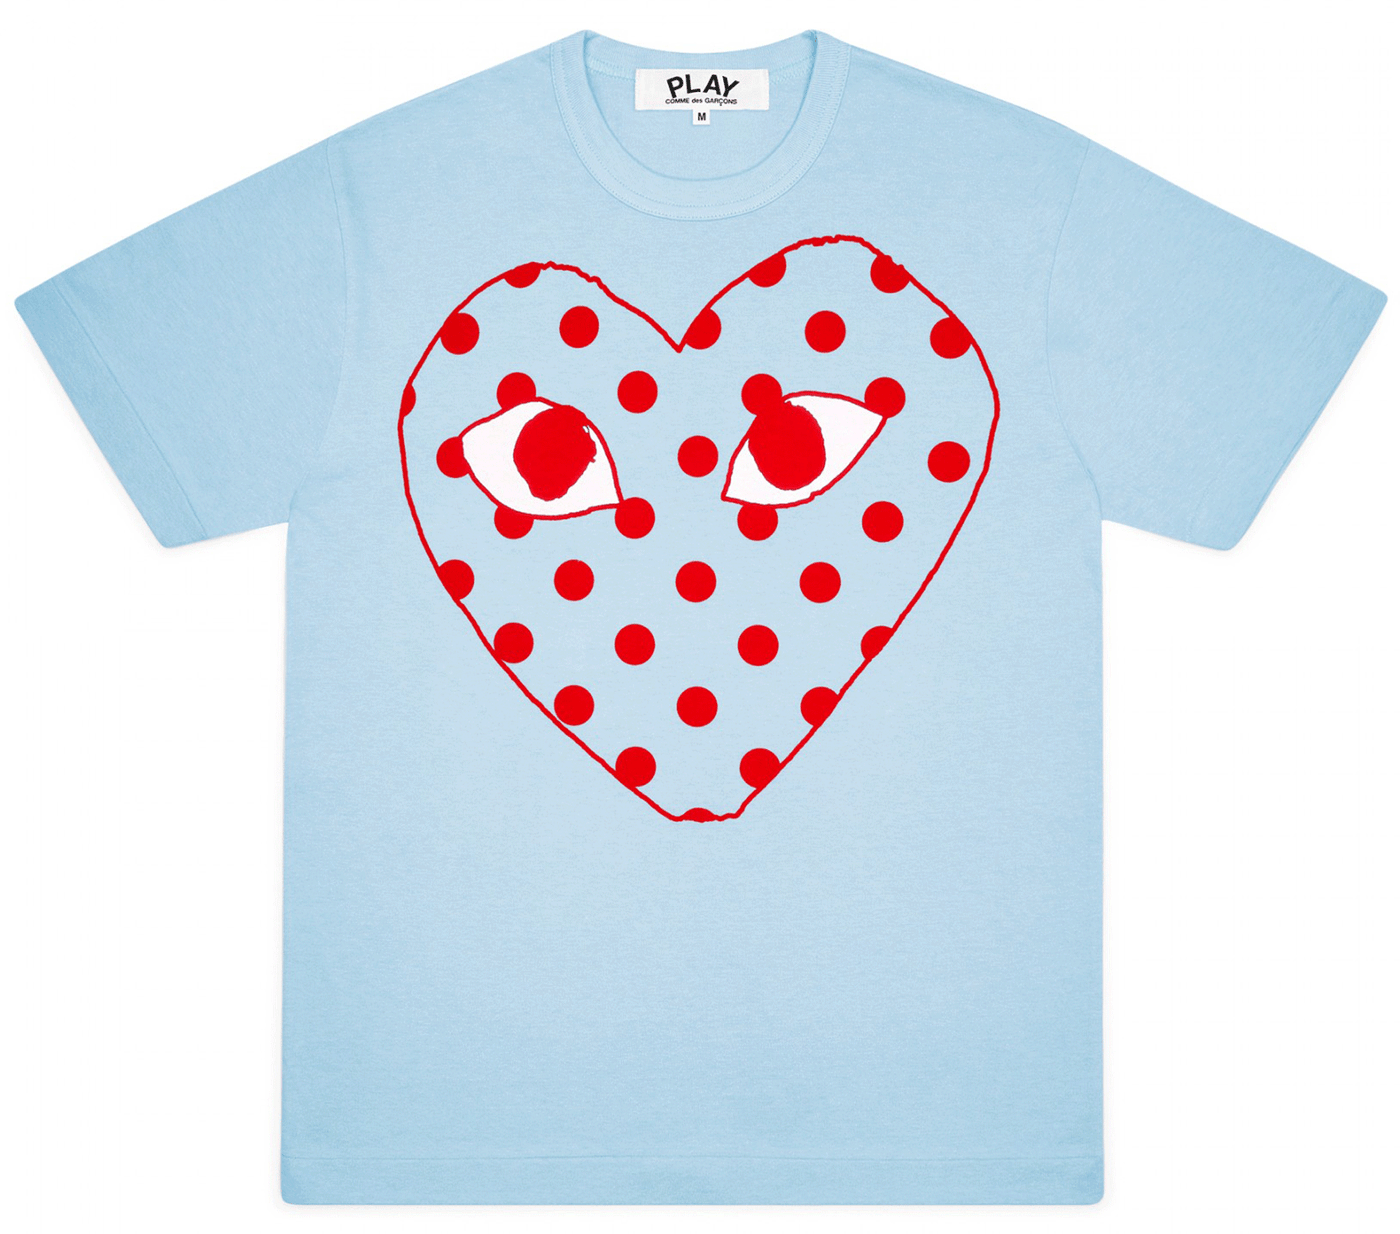 Comme-des-Garcons-Play-Bright-Red-Spotted-Heart-T-Shirt-Men-Blue-1